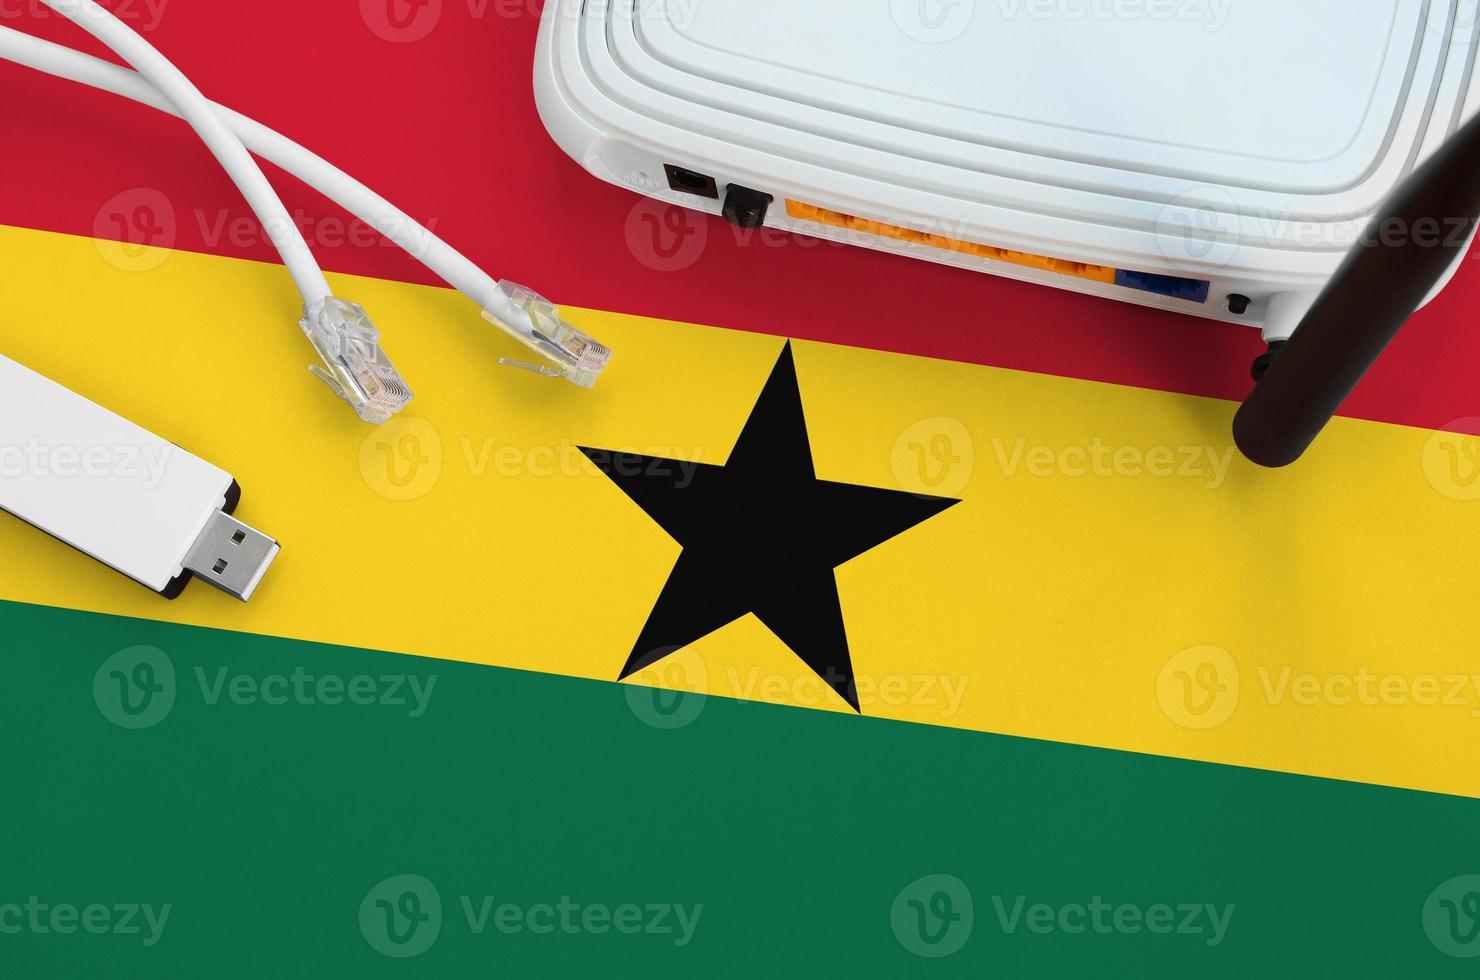 Ghana flag depicted on table with internet rj45 cable, wireless usb wifi adapter and router. Internet connection concept photo